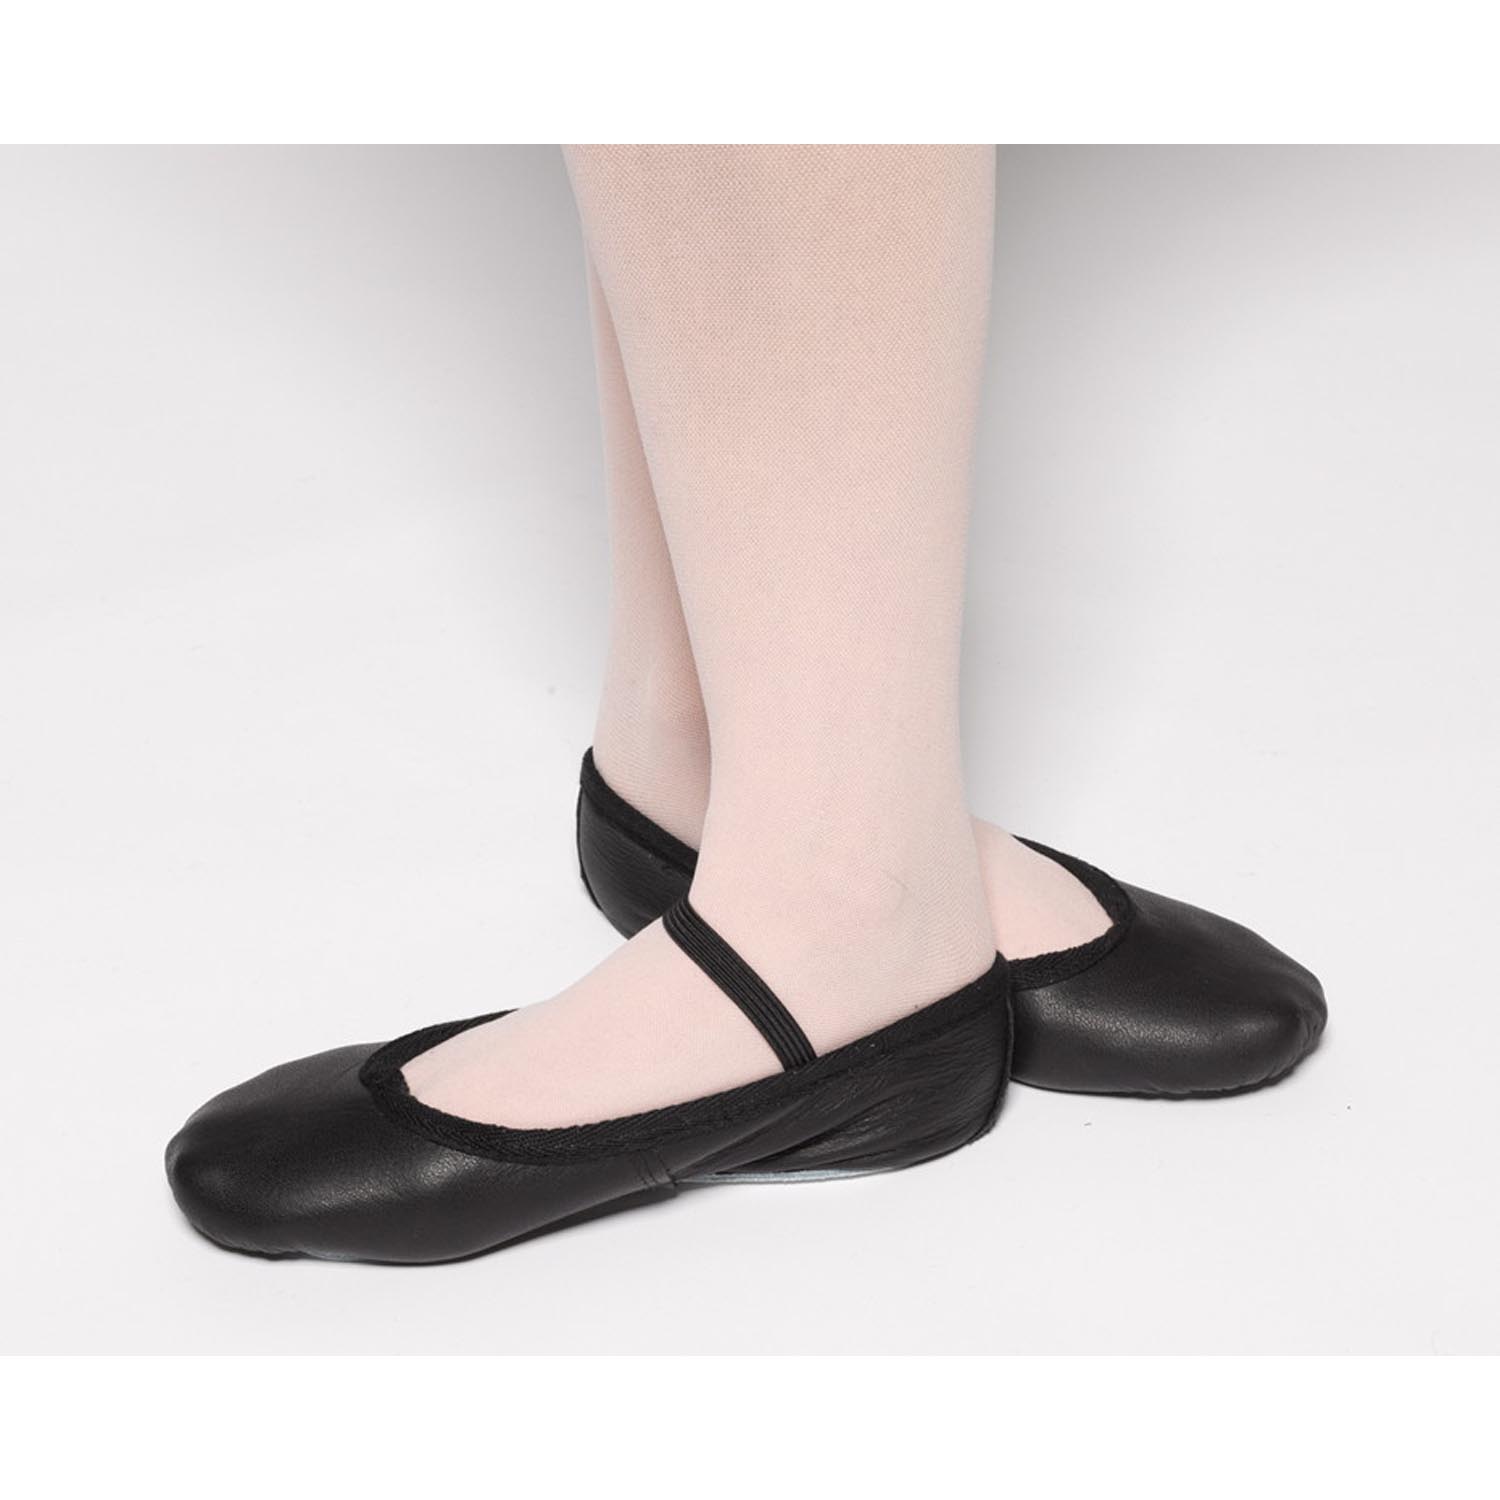 Stylish and Durable Black Ballet Shoes 